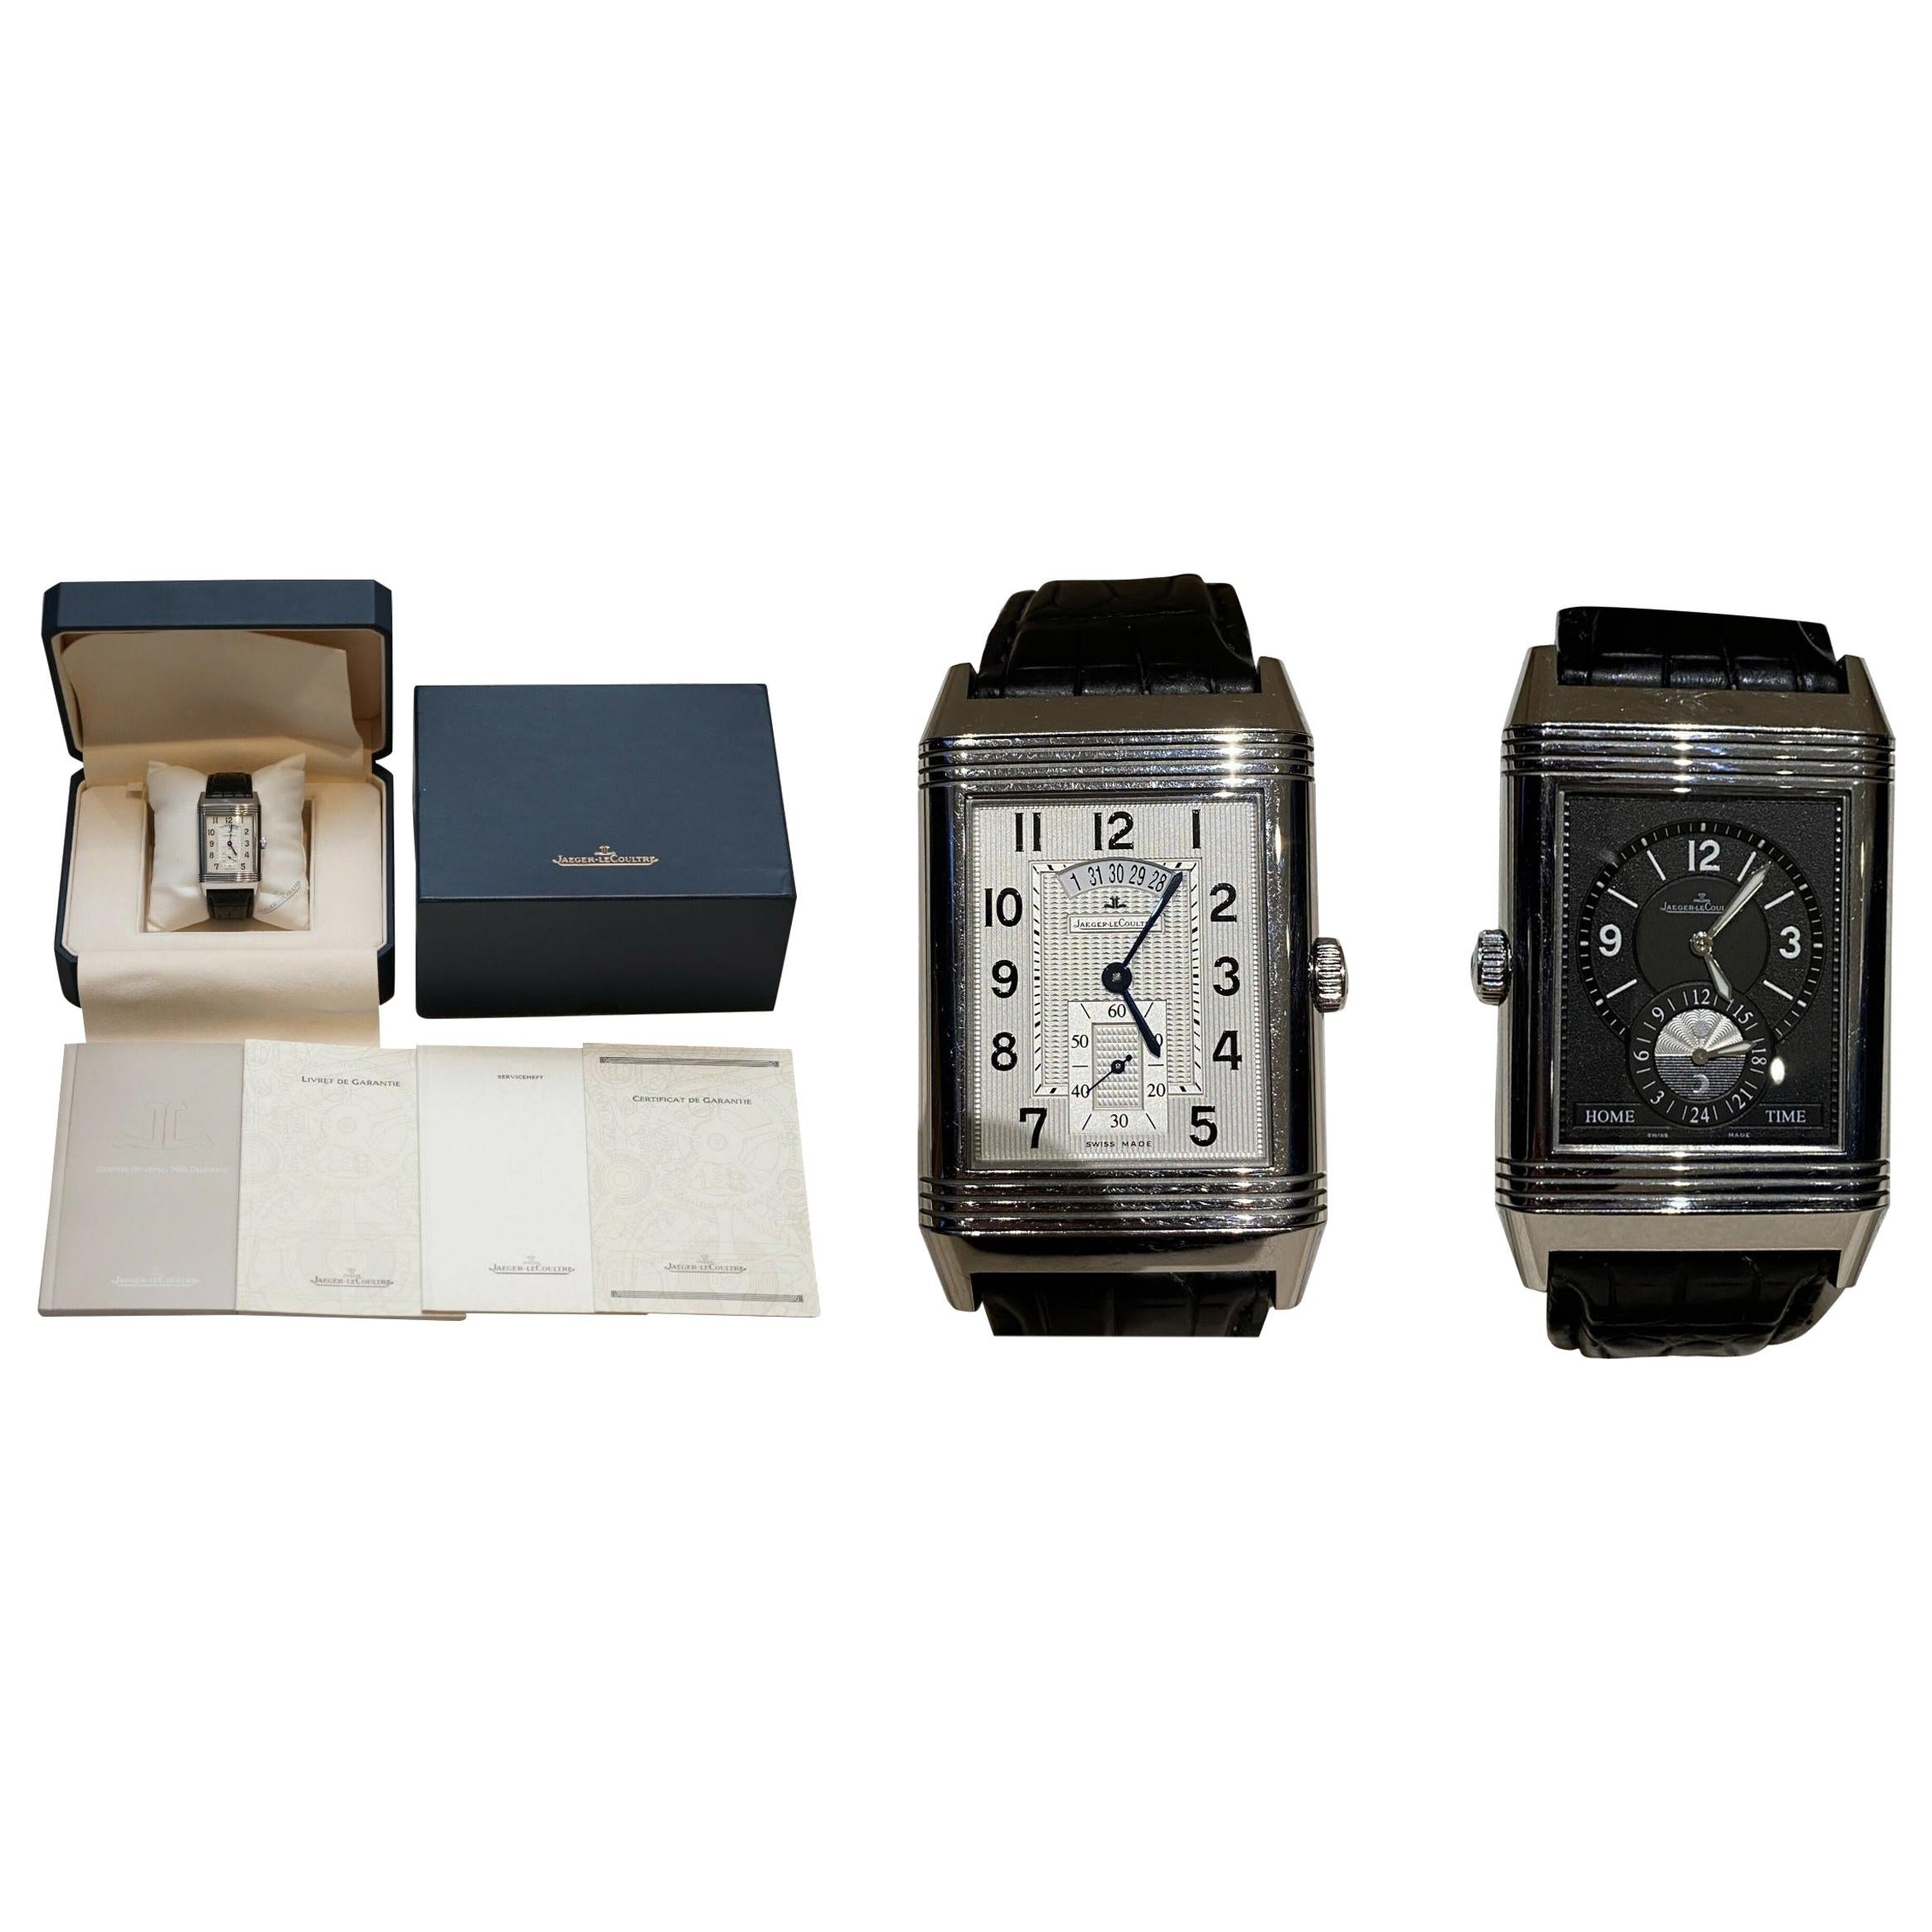 Ltd Edition Jager Lecoultre Grand Reverso 986 Duodate Double Sided Wristwatch For Sale